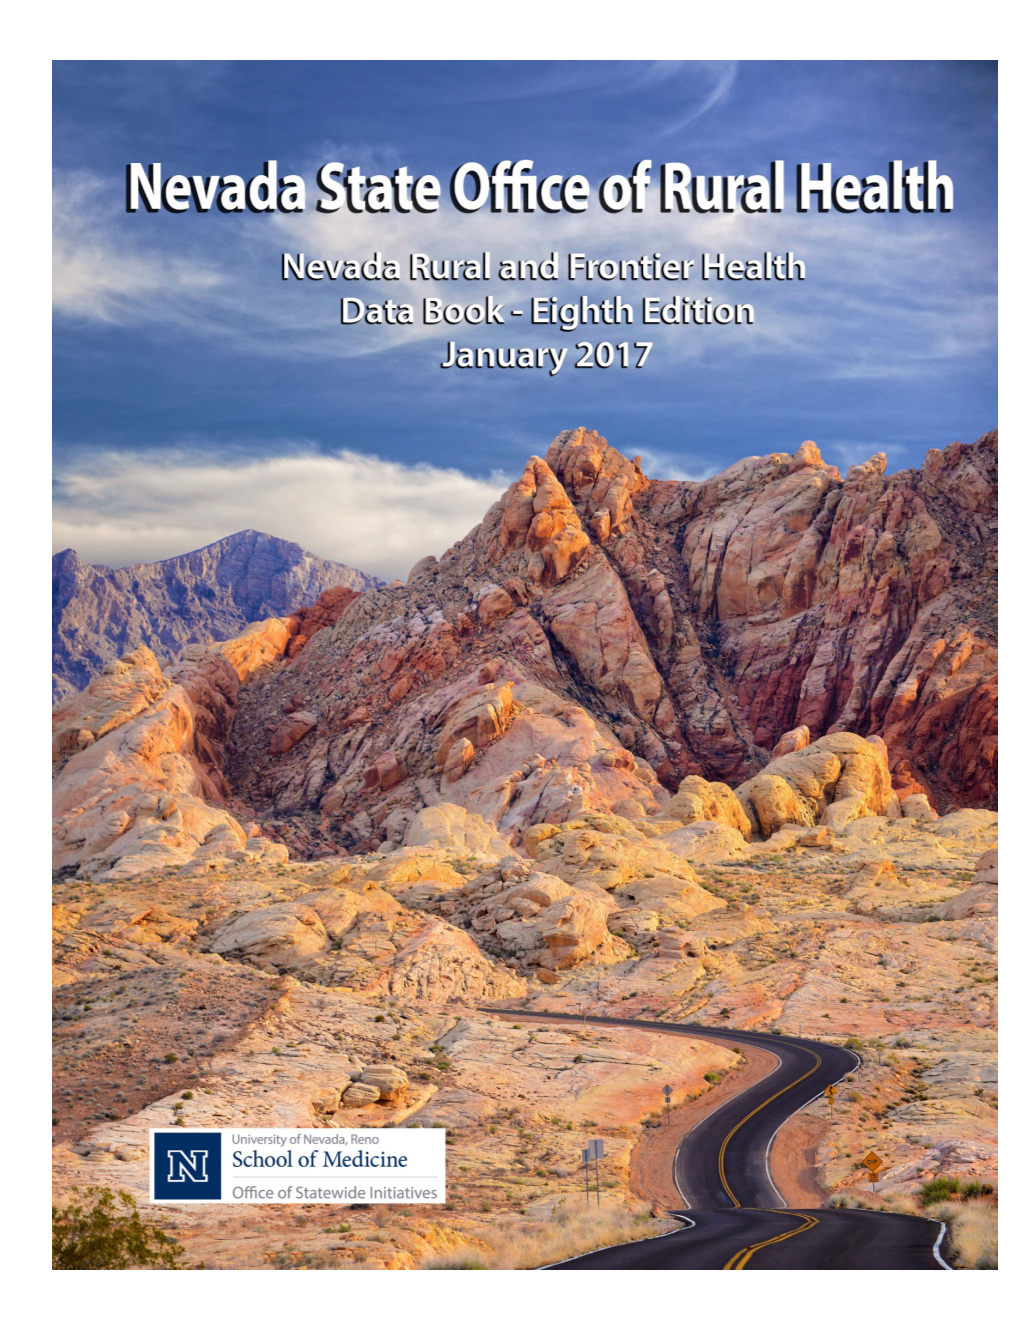 2017 Nevada Rural and Frontier Health Data Book